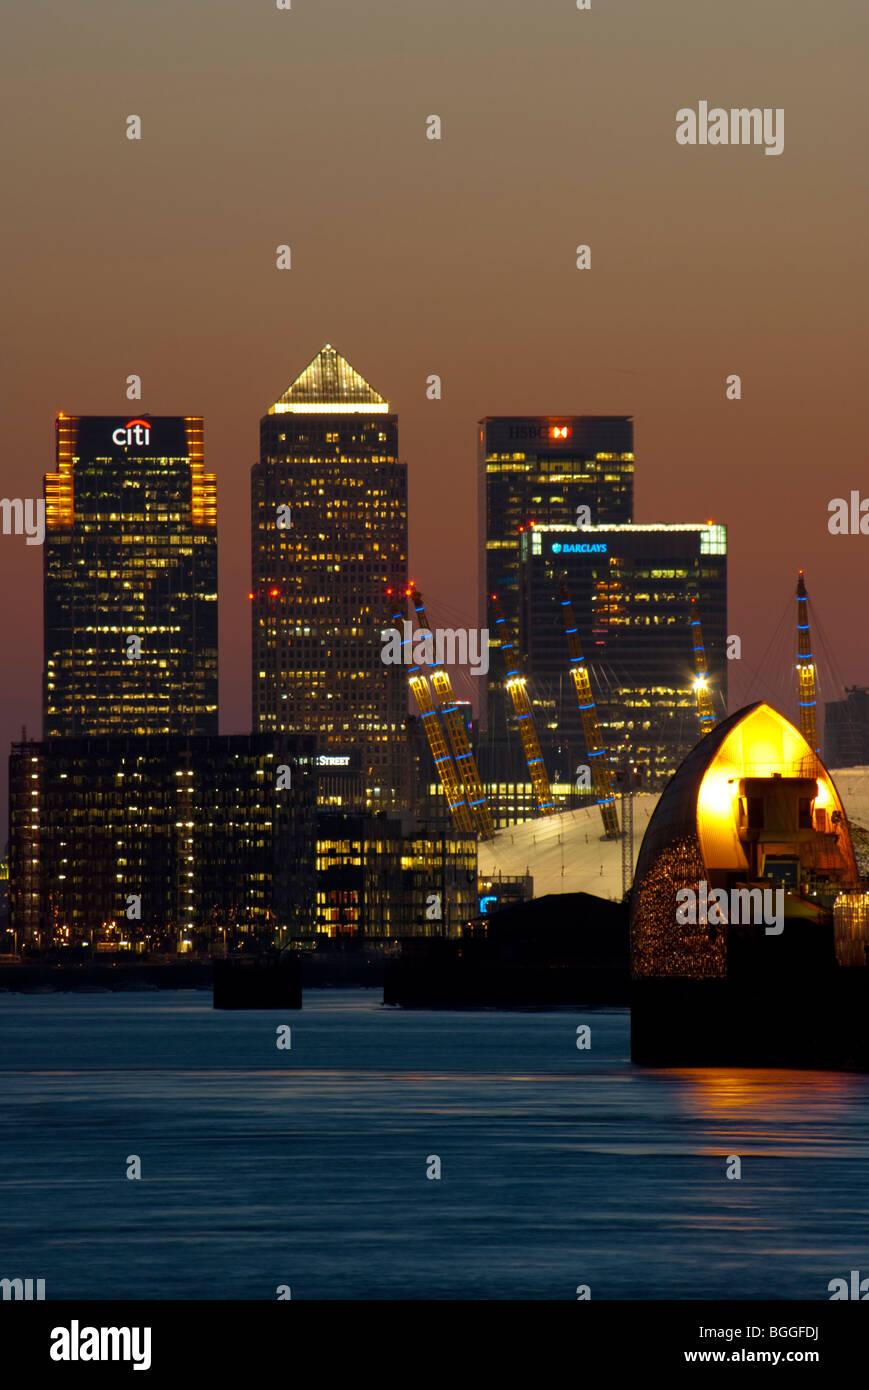 Canary Wharf, Thames Barrier, Royaume-Uni, Angleterre, Londres Banque D'Images